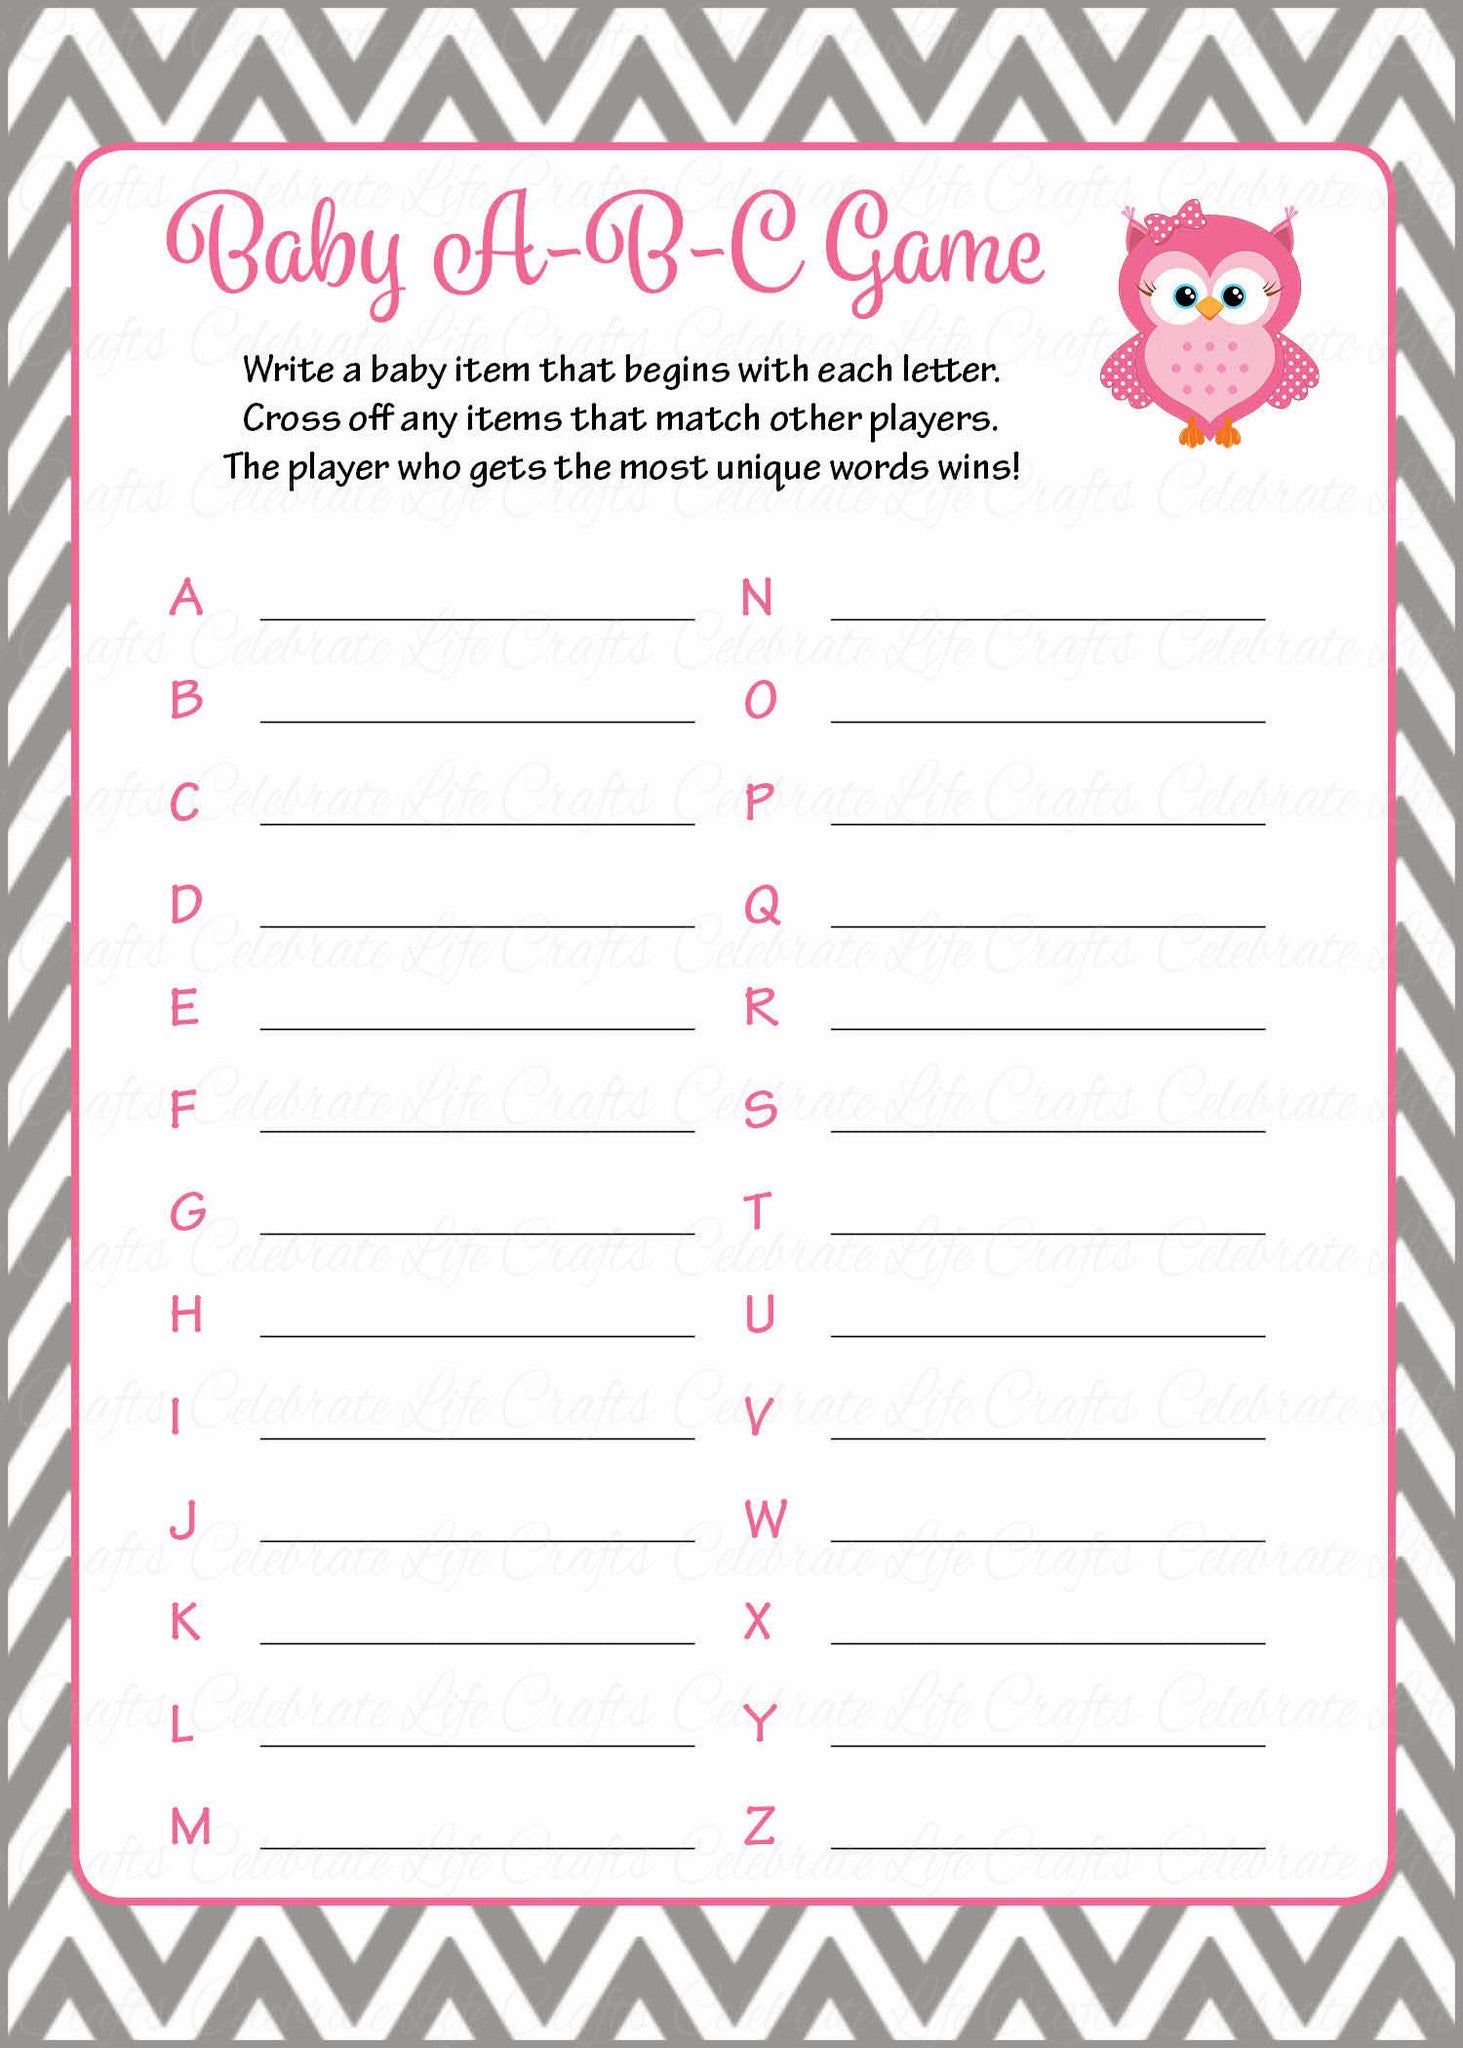 Baby ABC's Baby Shower Game - Owl Baby Shower Theme for Baby Girl